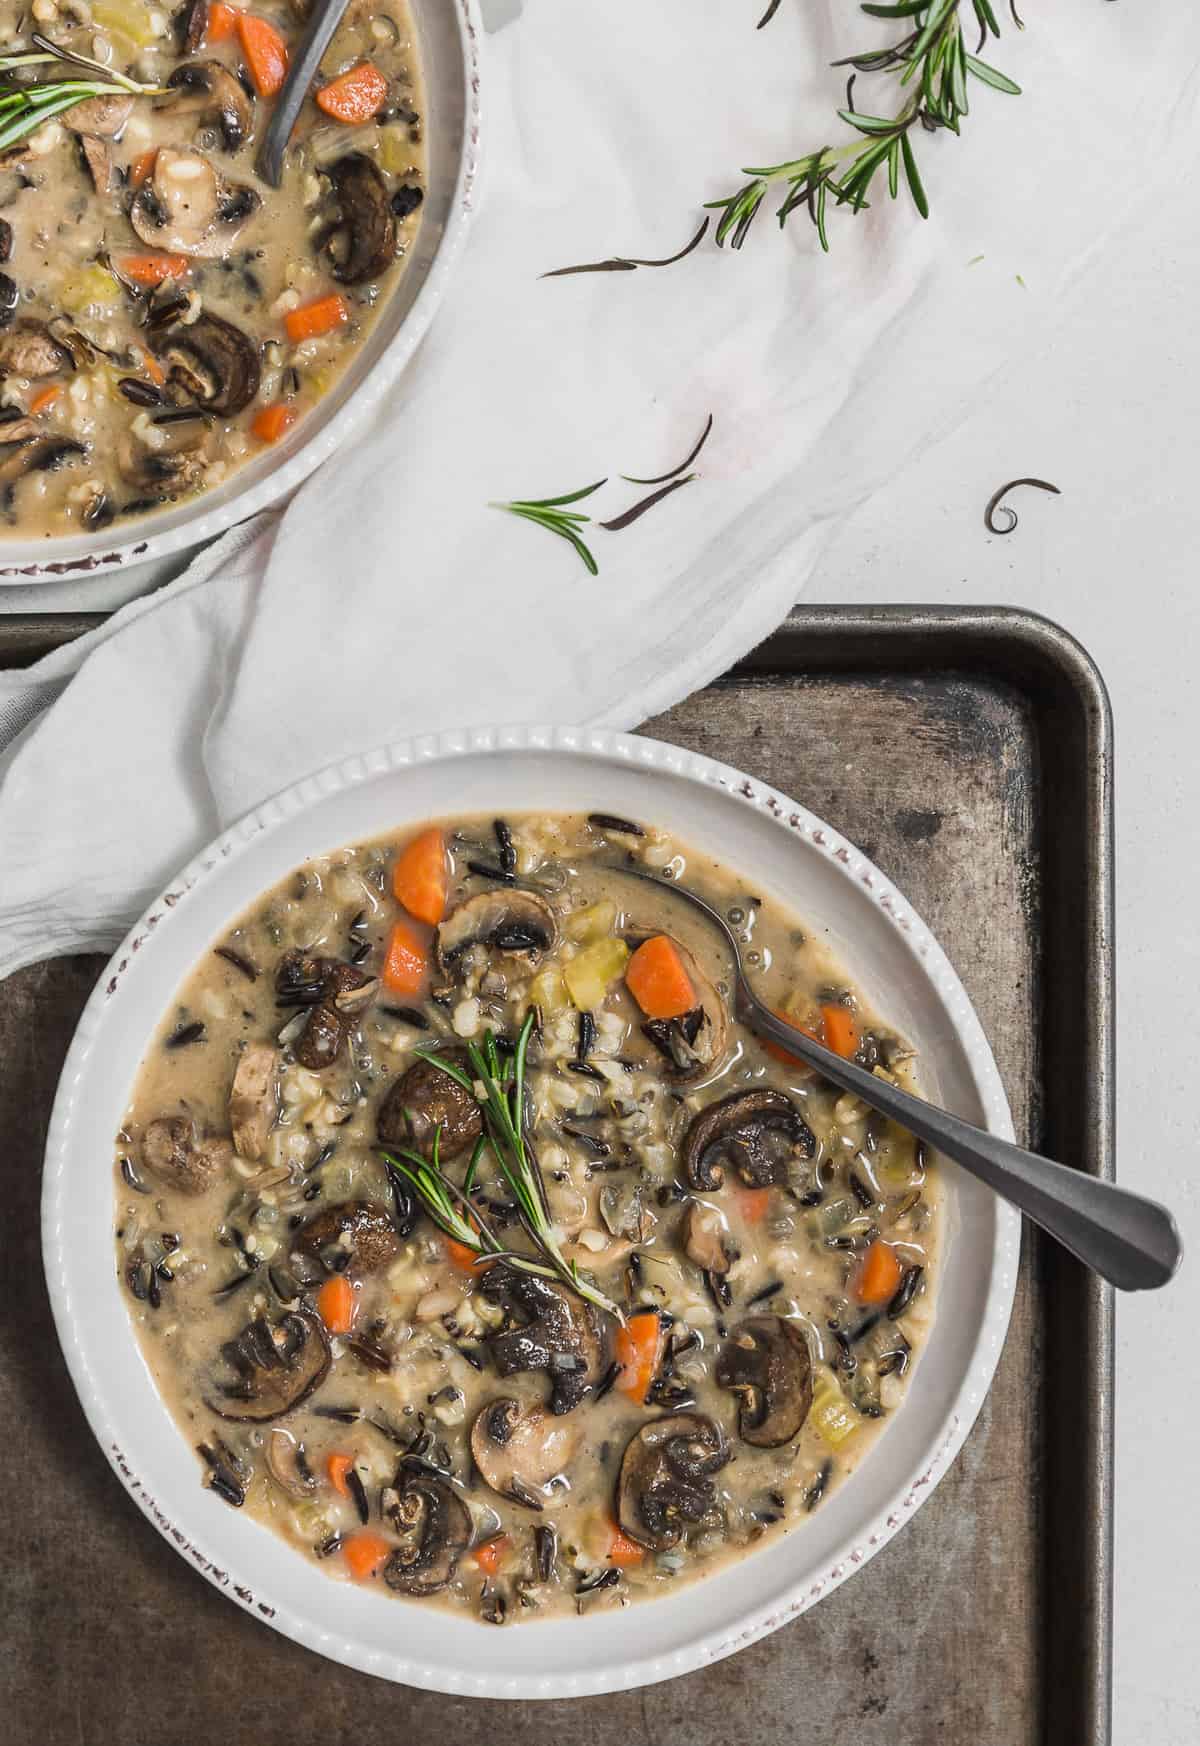 Creamy Mushroom and Wild Rice Soup, plant based, vegan, vegetarian, whole food plant based, gluten free, recipe, wfpb, healthy, healthy vegan, oil free, no refined sugar, no oil, refined sugar free, dairy free, dinner party, entertaining, soup